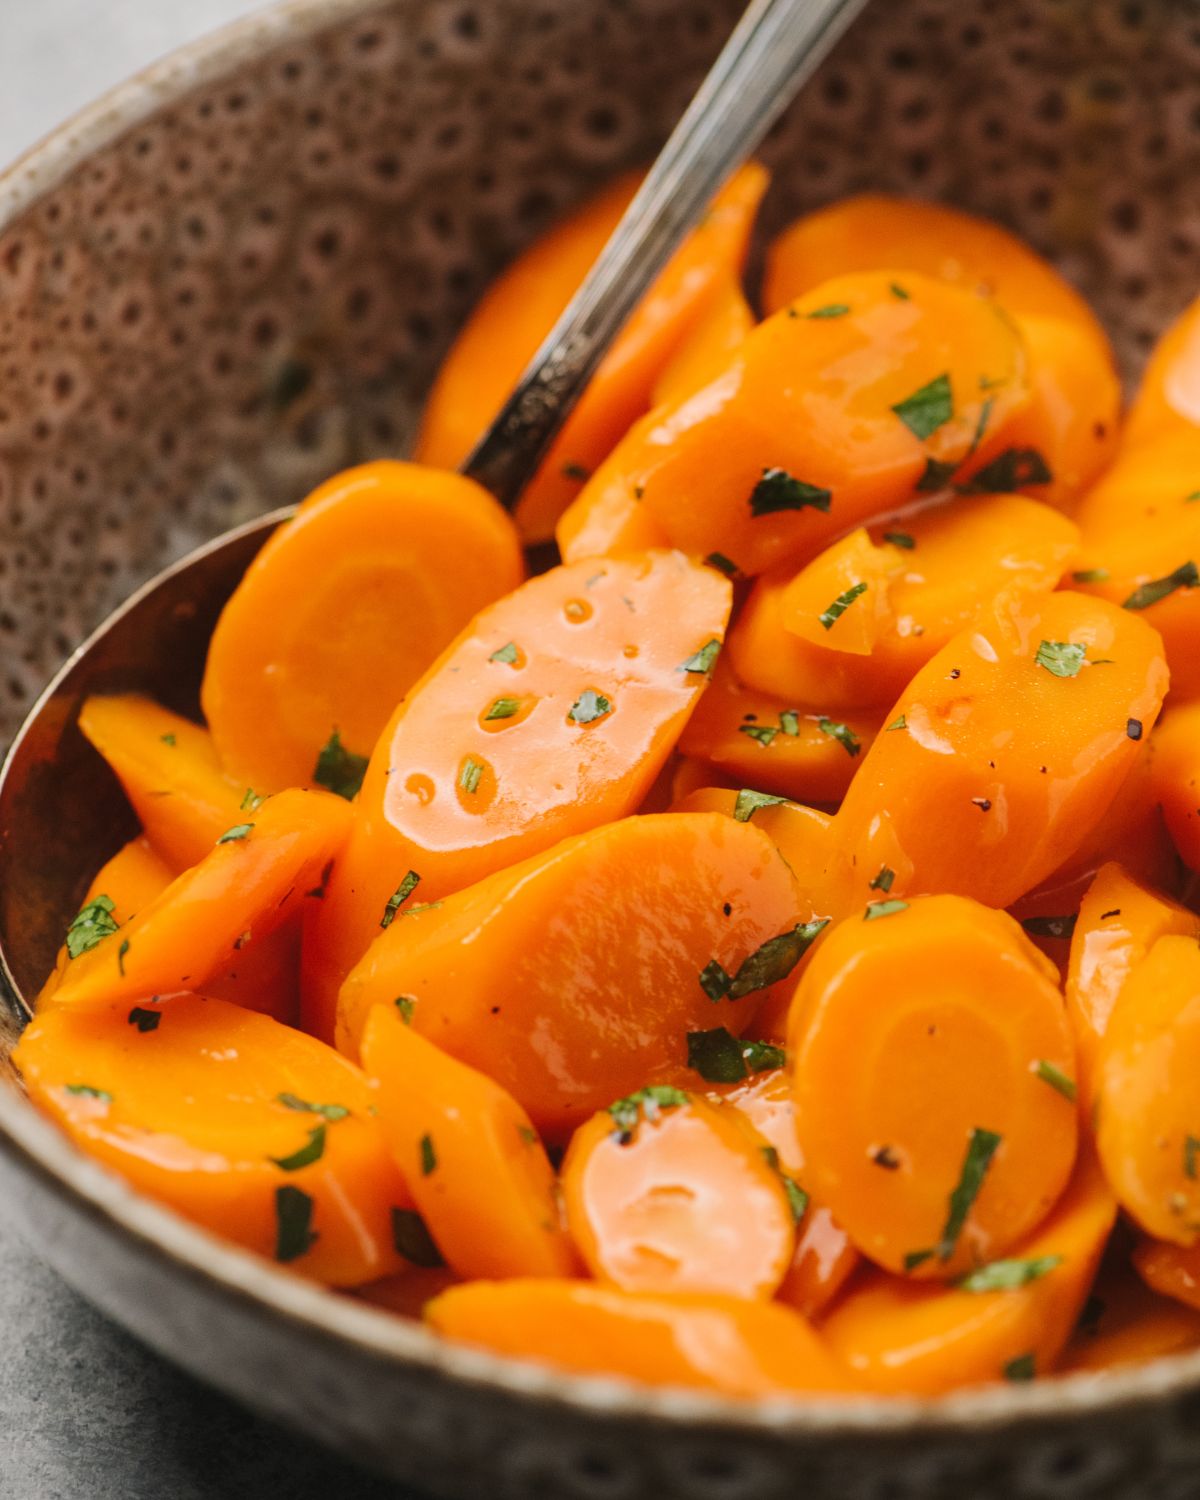 Carrots in a bowl.